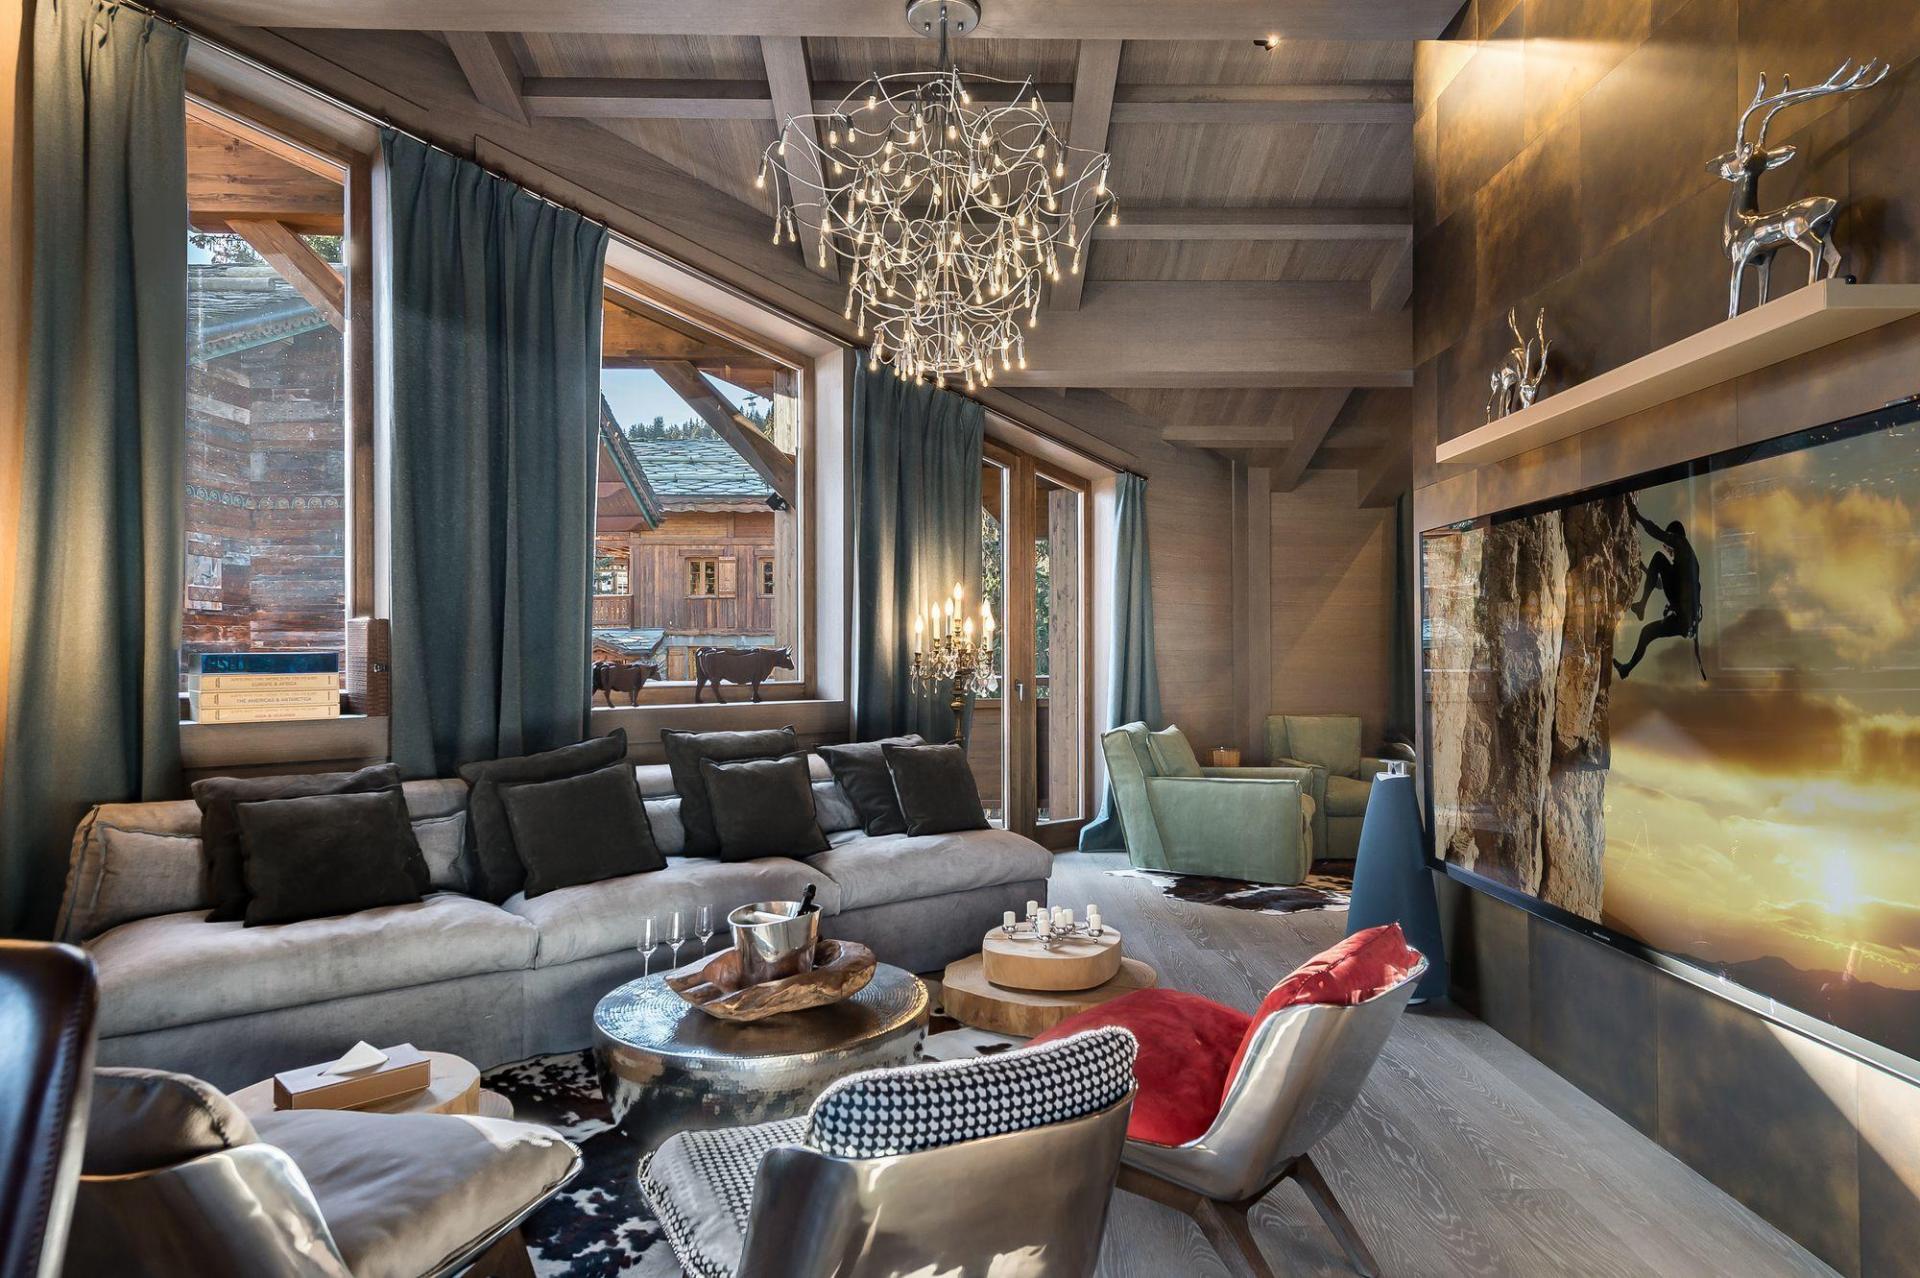 A GOOD ATHMOSPHERE IN A LUXURY SKI RENTAL CHALET IN THE FRENCH ALPS